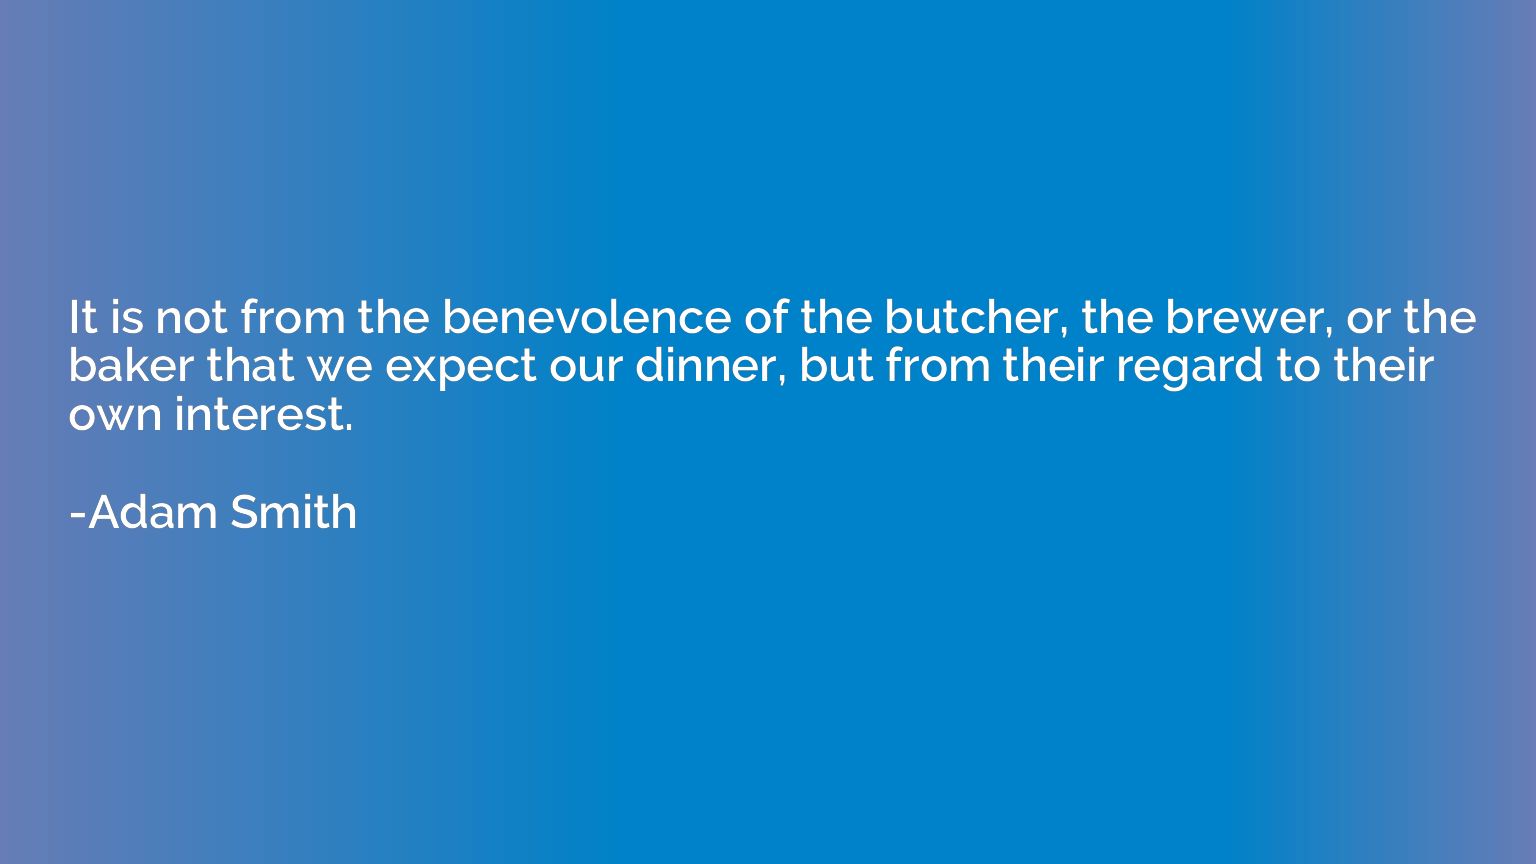 It is not from the benevolence of the butcher, the brewer, o